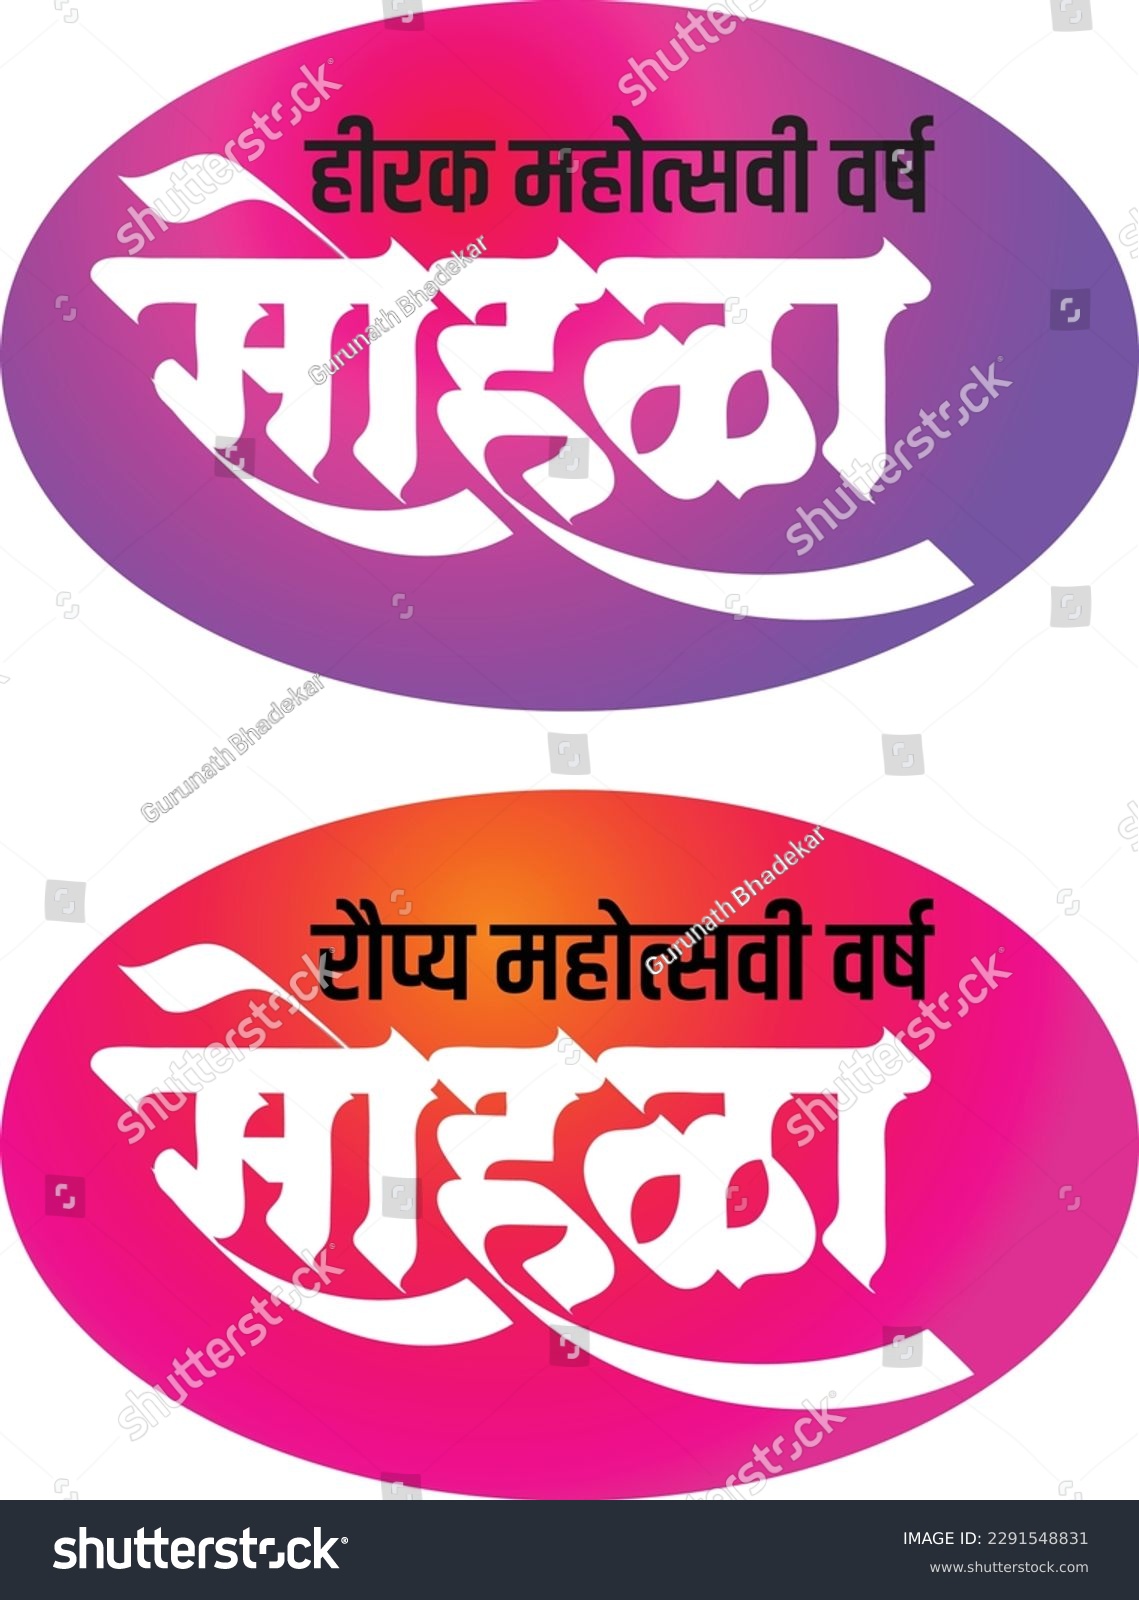 SVG of Silver jubilee and diamond jubilee logo. 25 years, 60 years, in Hindi, Marathi Indian languages svg